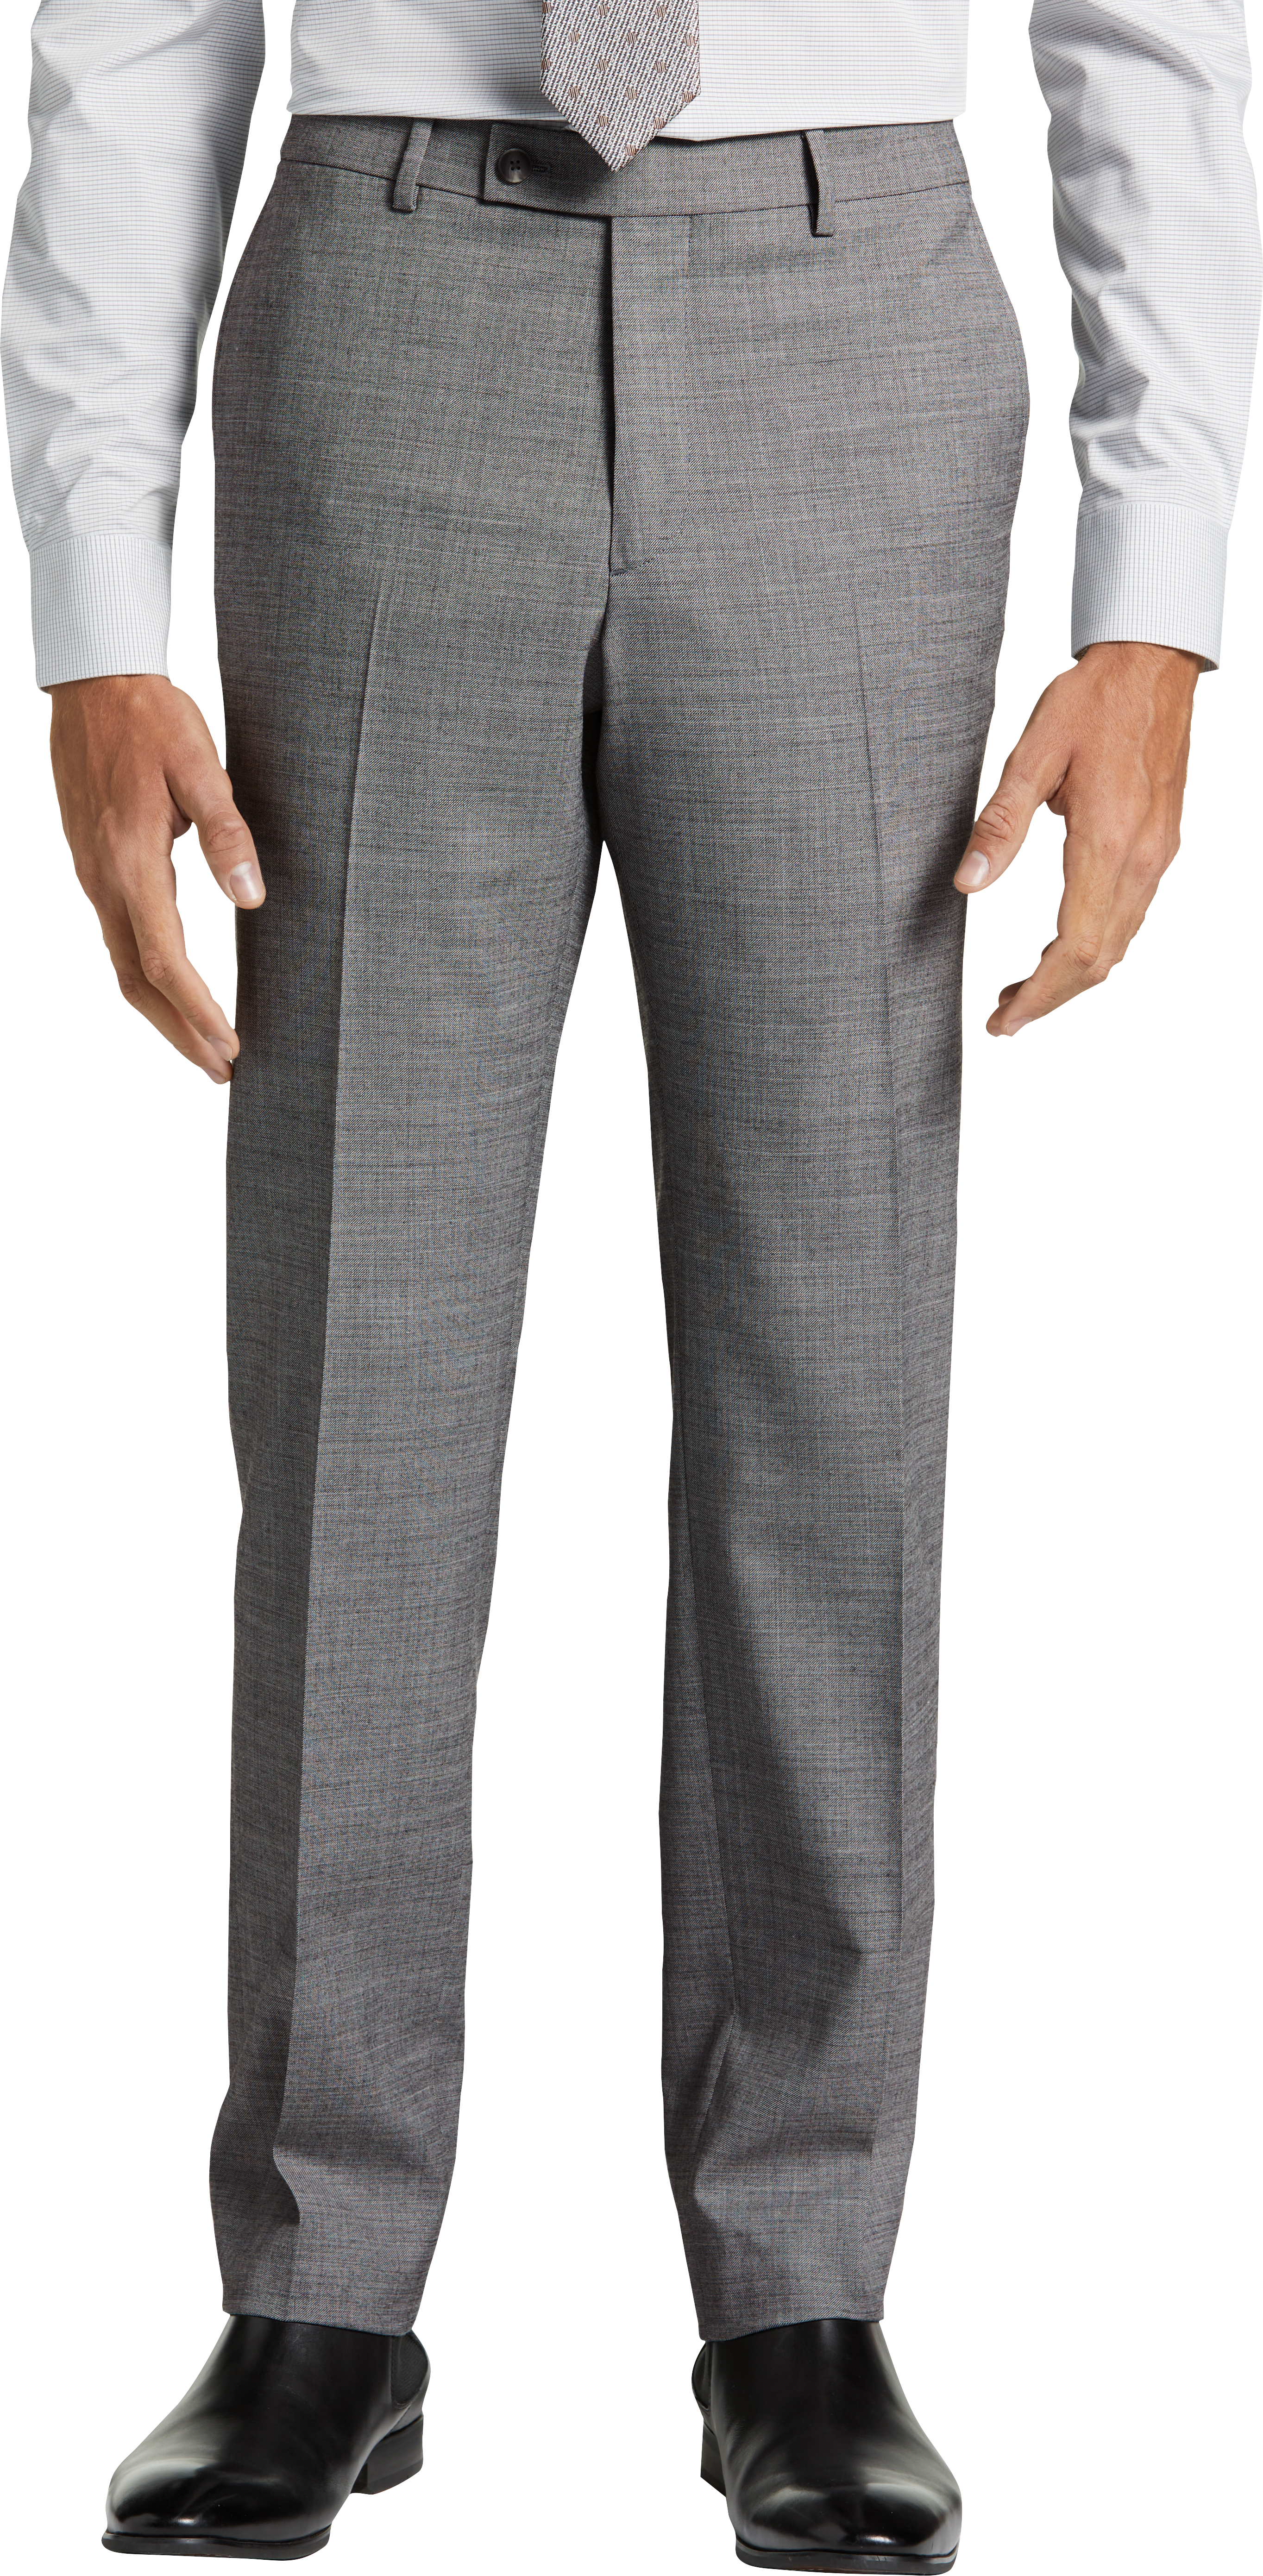 Mens Pants & Shorts, Big & Tall - Awearness Kenneth Cole AWEAR-TECH Slim Fit Suit Separates Pants, Black & White Sharkskin - Men's Wearhouse